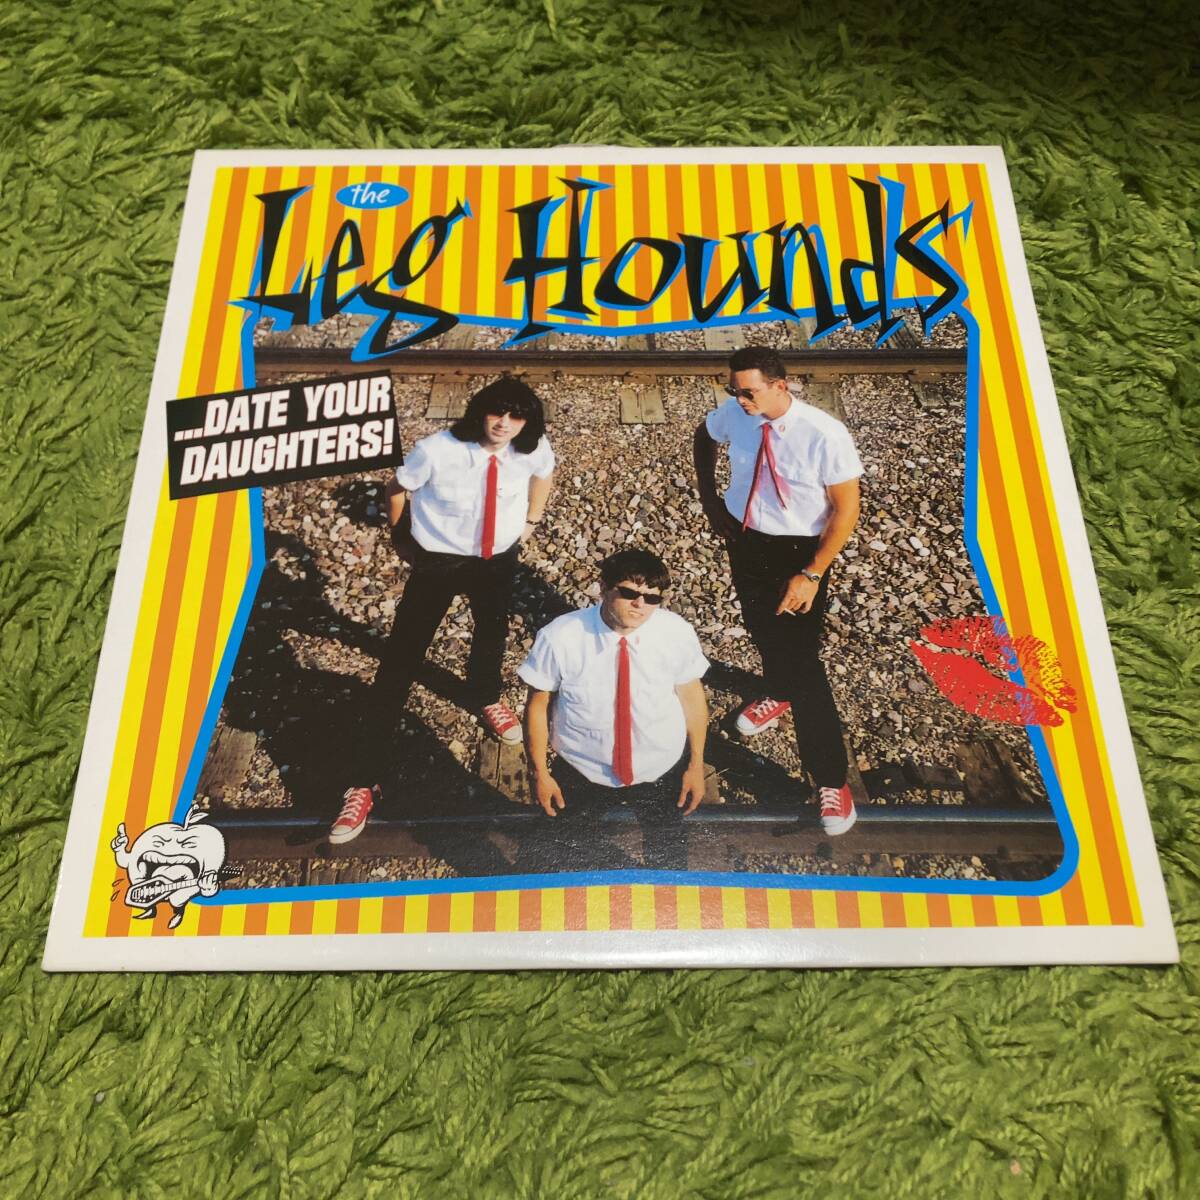  【The Leg Hounds - ... Date Your Daughters ! 】jetty boys devil dogs teengenerate_画像1